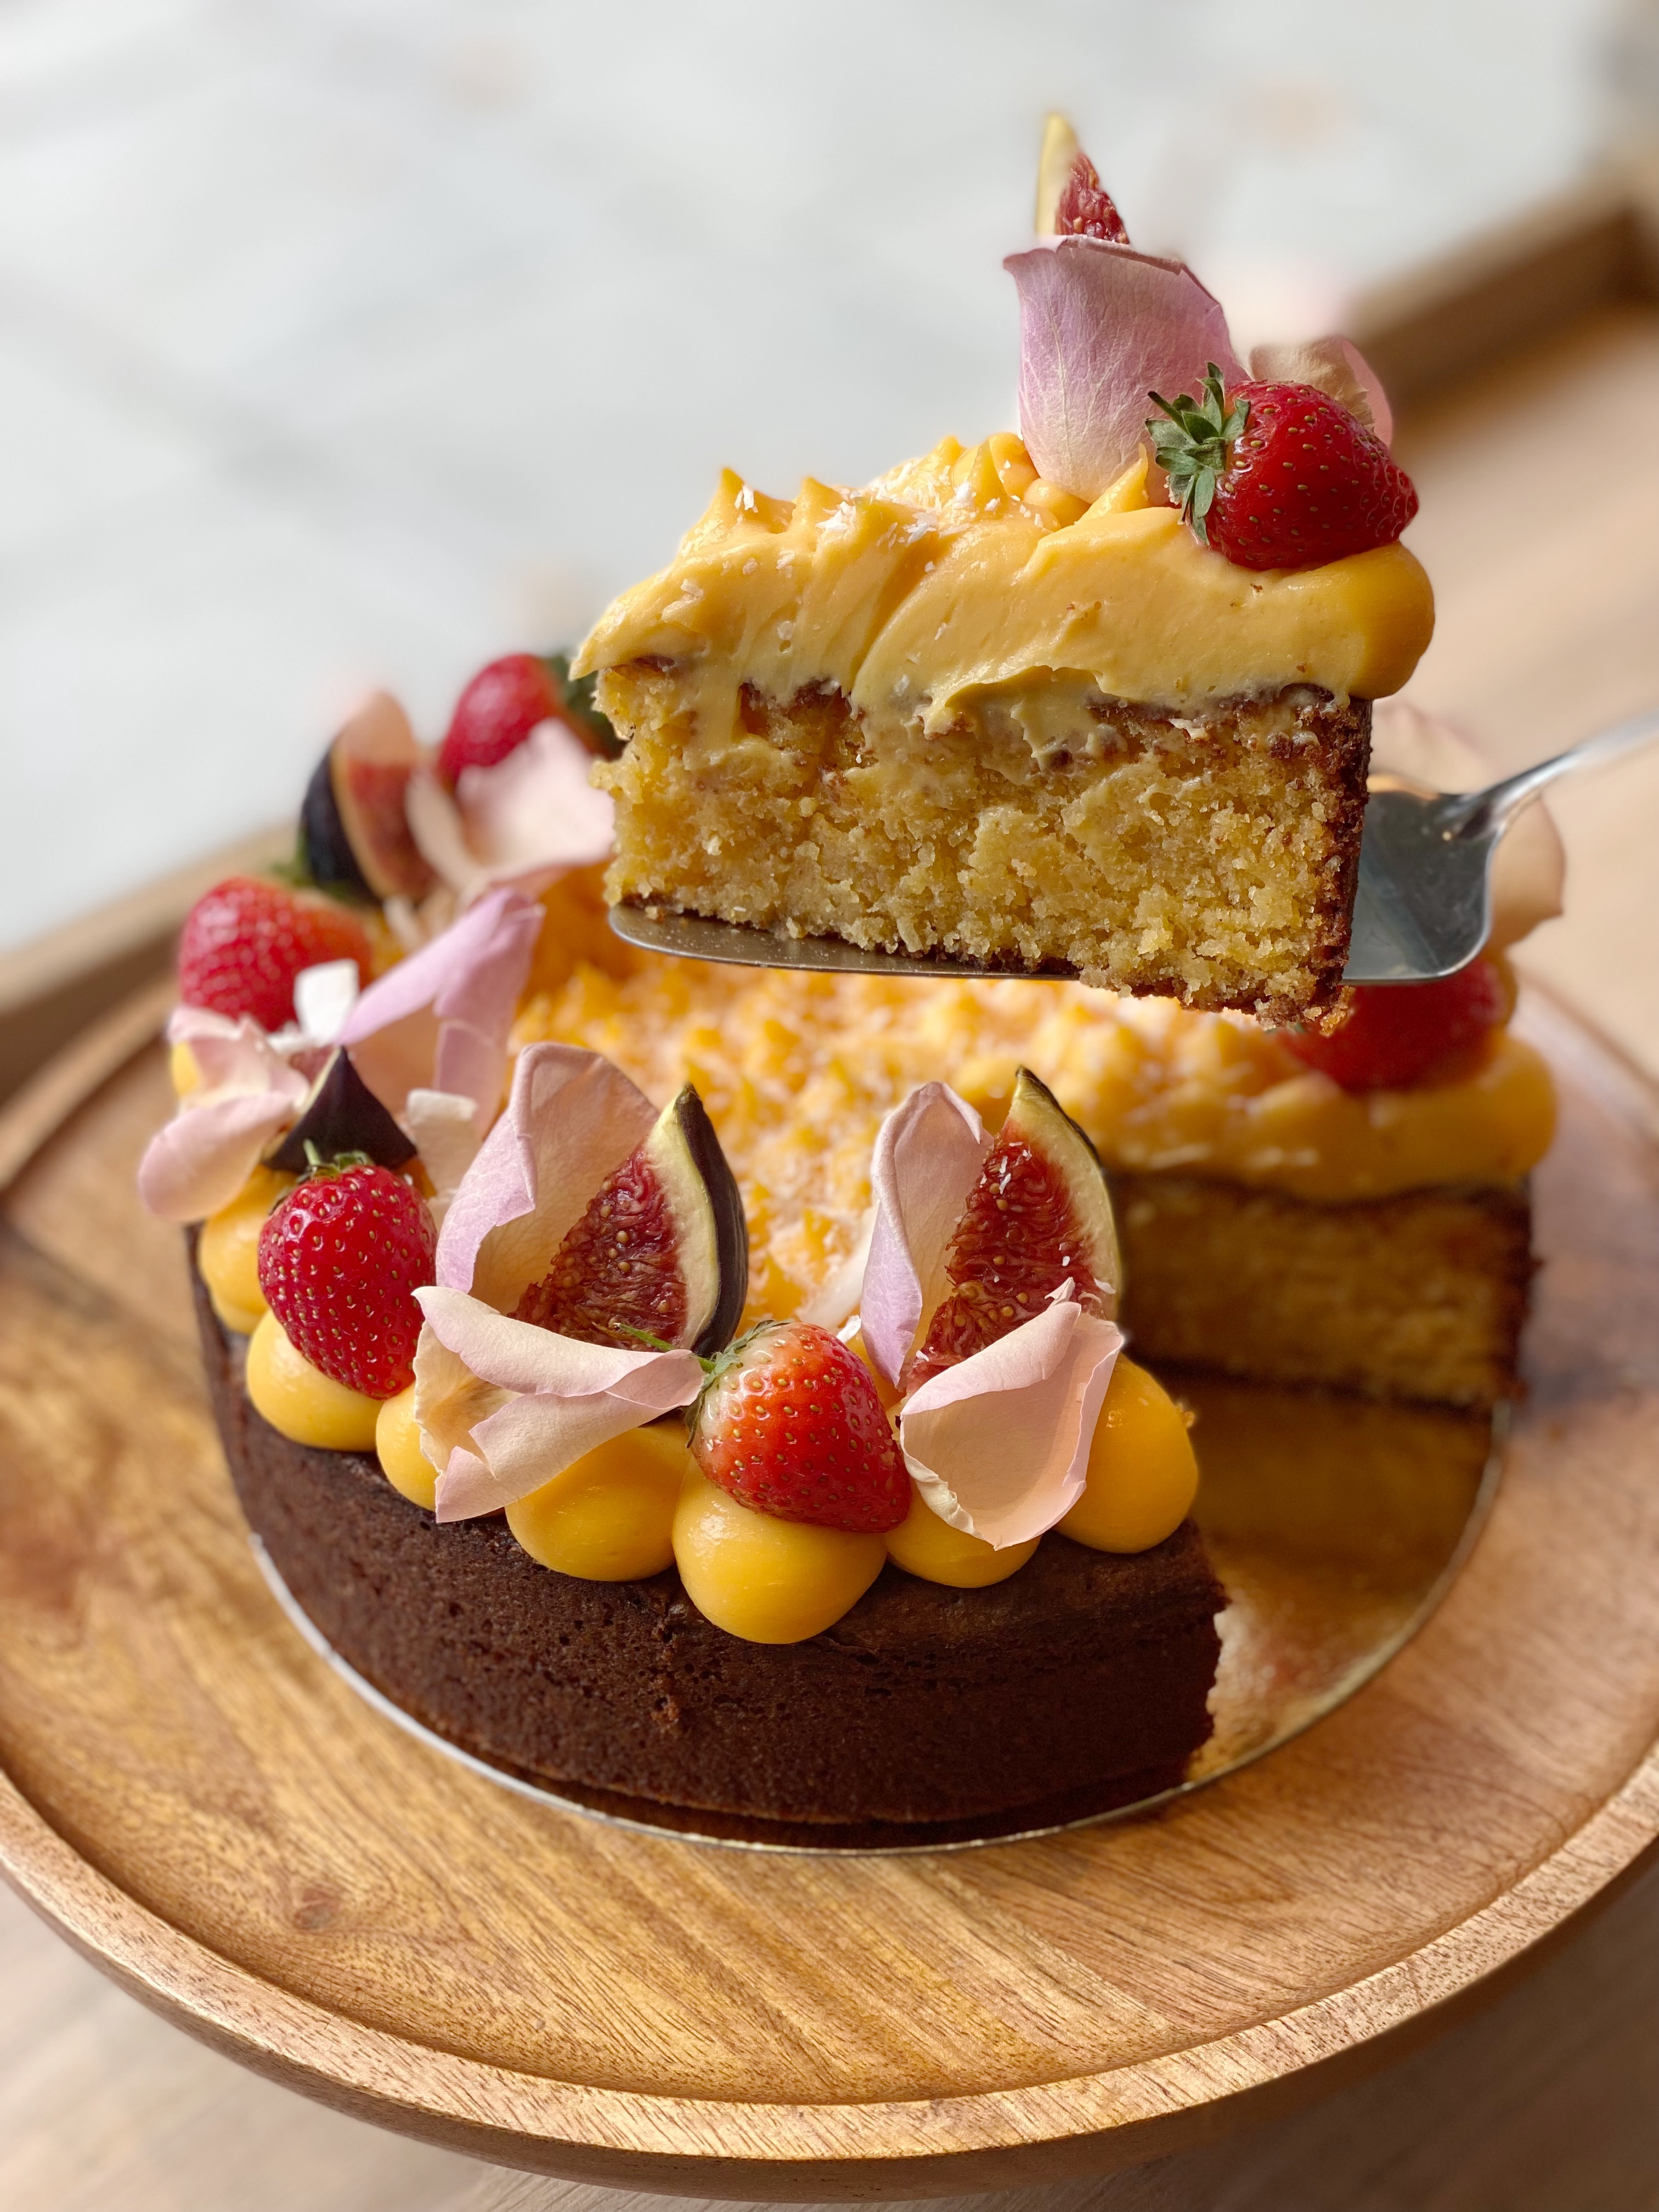 Coconut & Almond Cake with Passion Fruit Curd (GF)